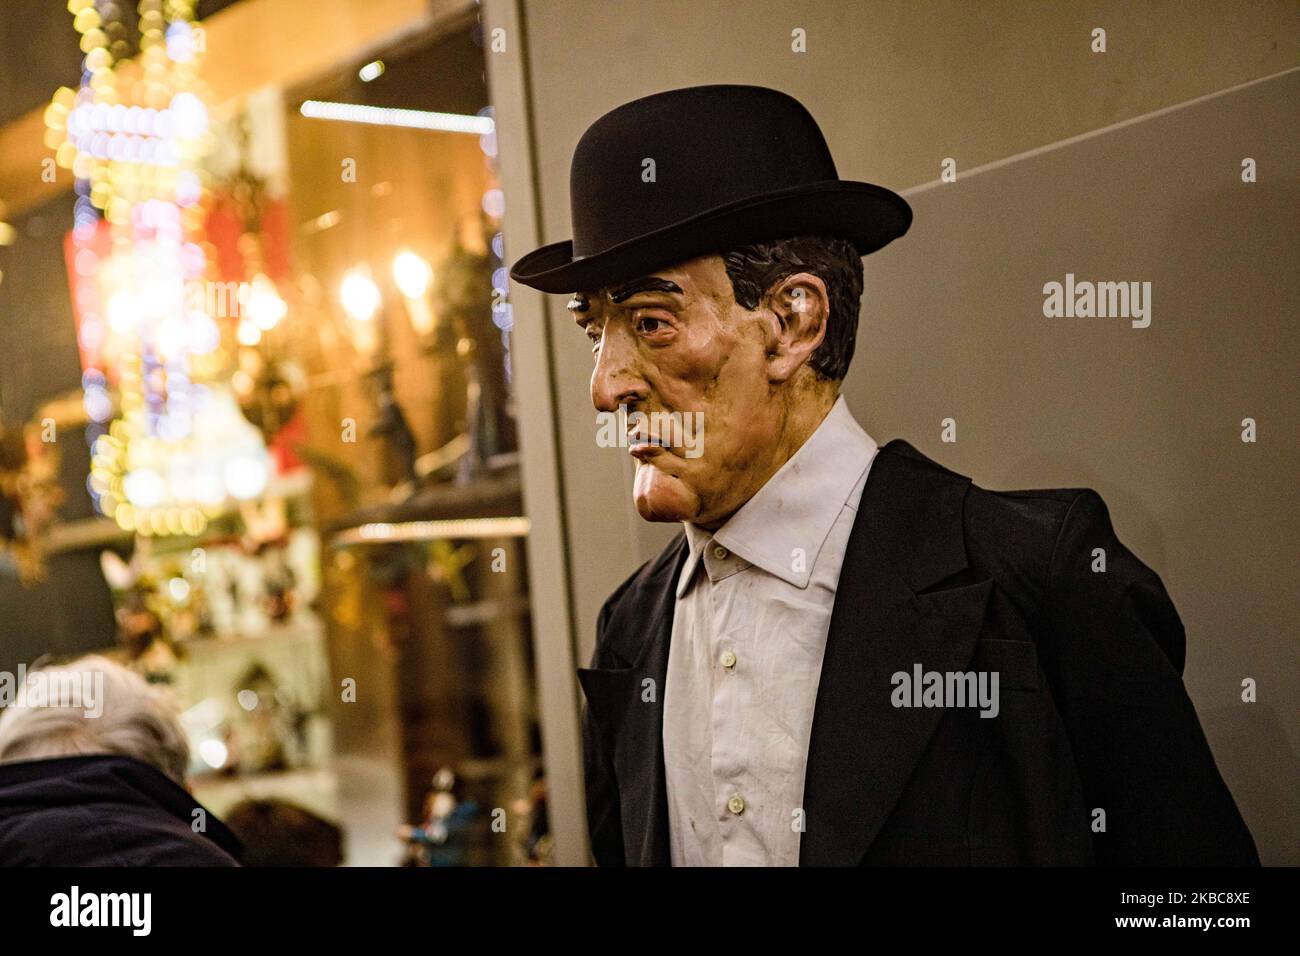 A statue of the Italian actor Toto', pseudonym of Antonio de Curtis, is exhibited outside the Rinascente in Piazza del Duomo in Milan., Italy, on December 06 2019. (Photo by Mairo Cinquetti/NurPhoto) Stock Photo